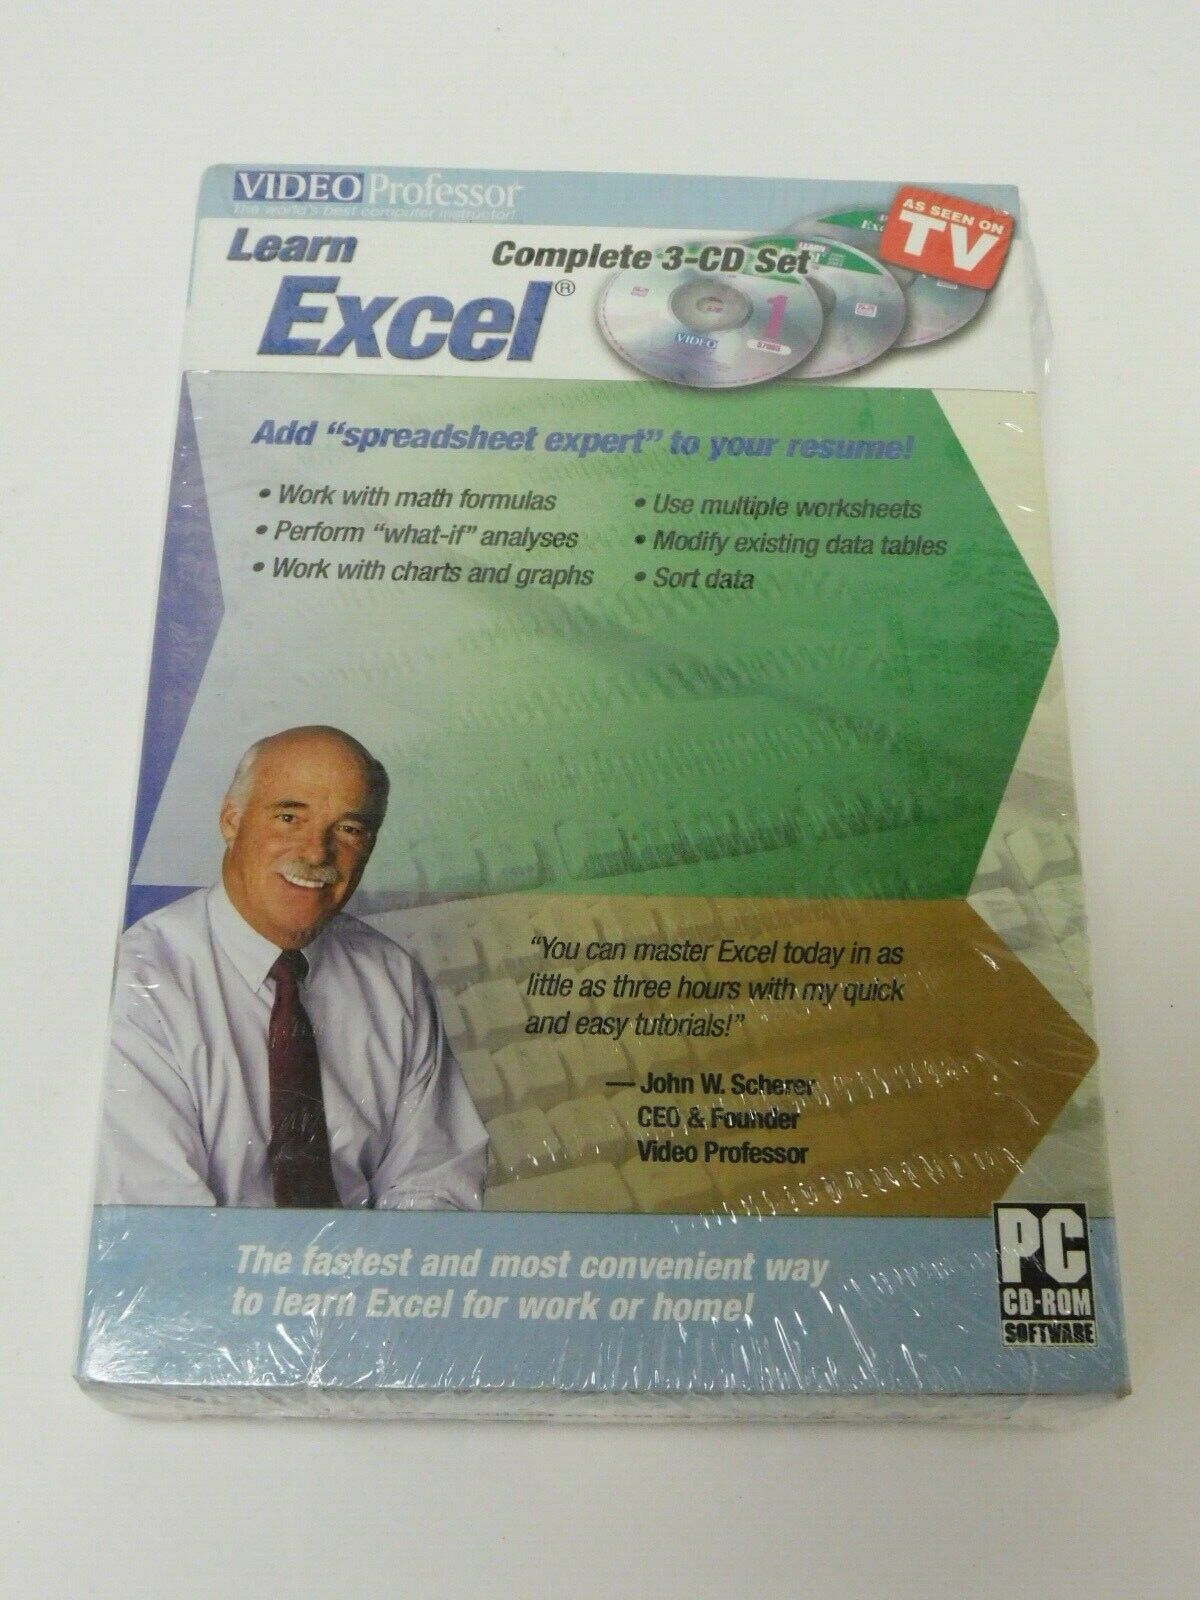 New Video Professor Learn Excel Fast & Easy 3-CD Set PC CD-ROM - Factory Sealed